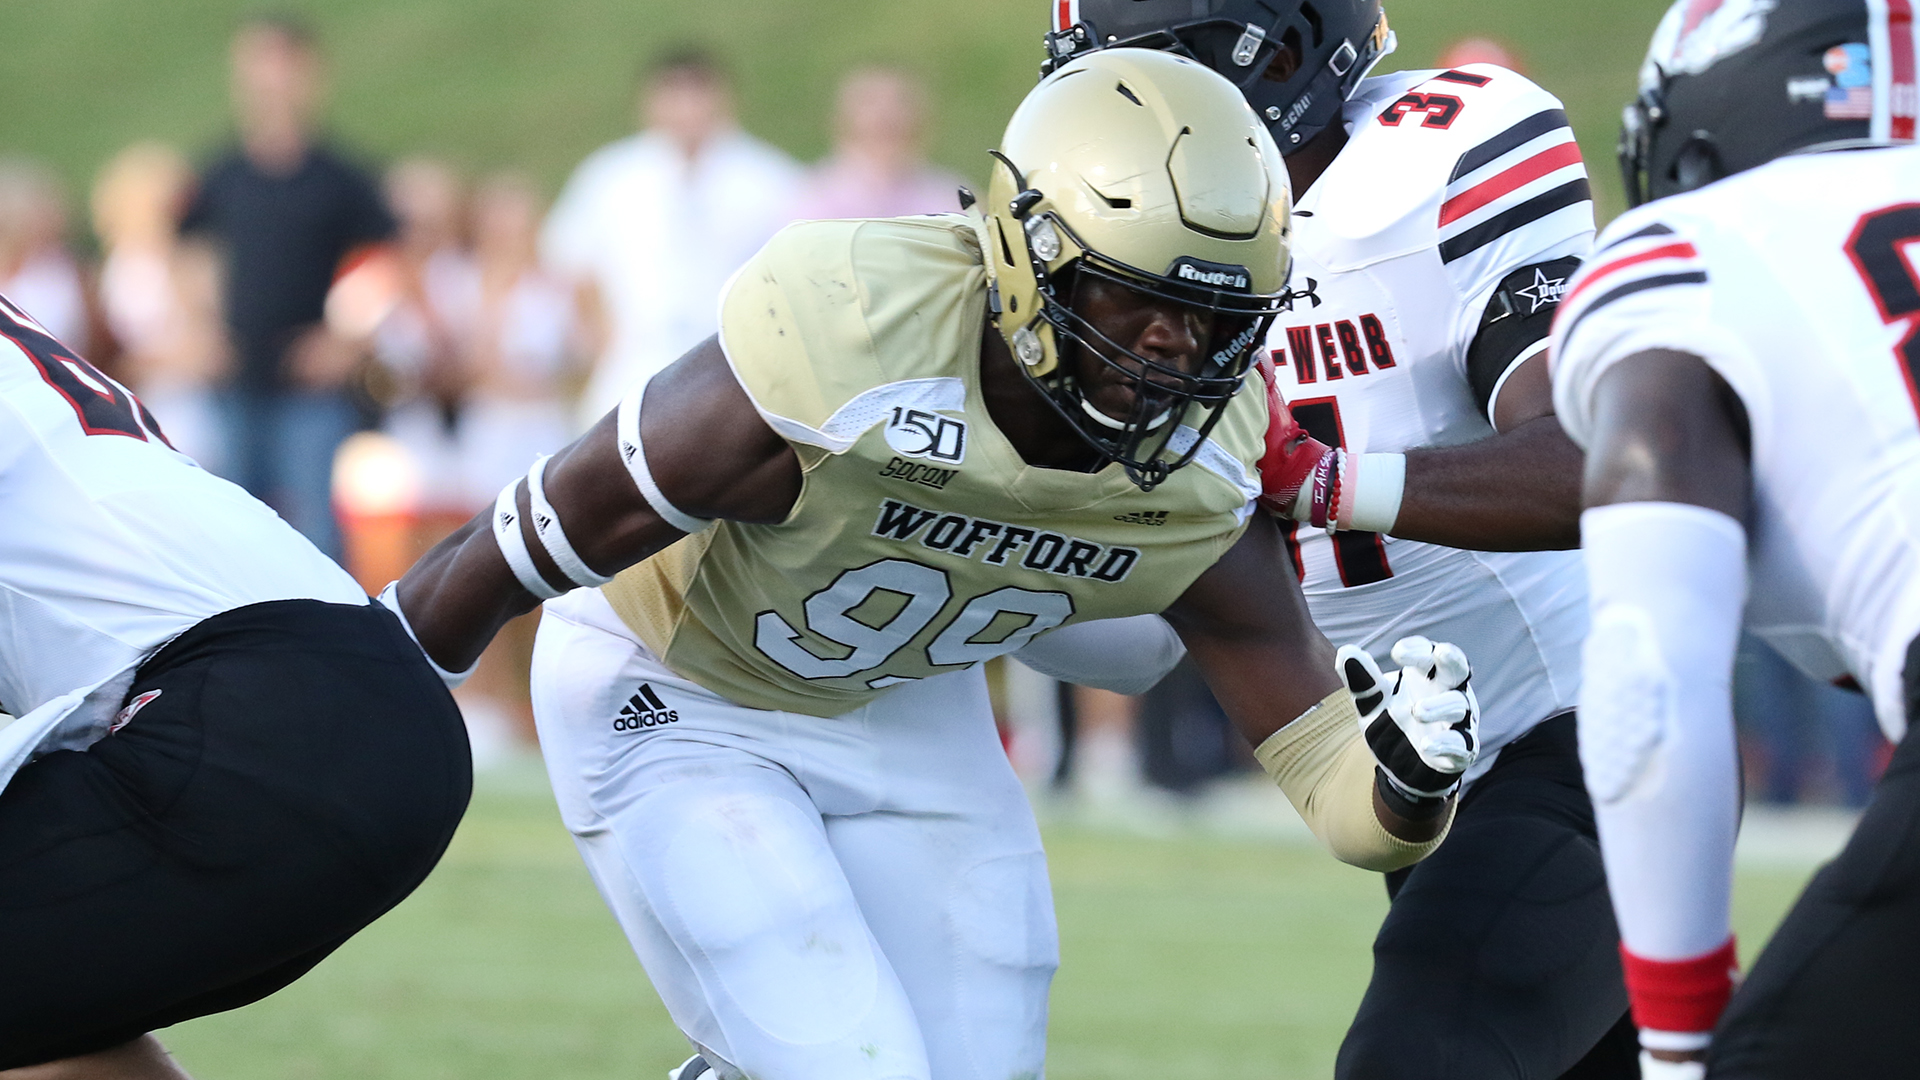 2021 FCS Season Preview: Wofford